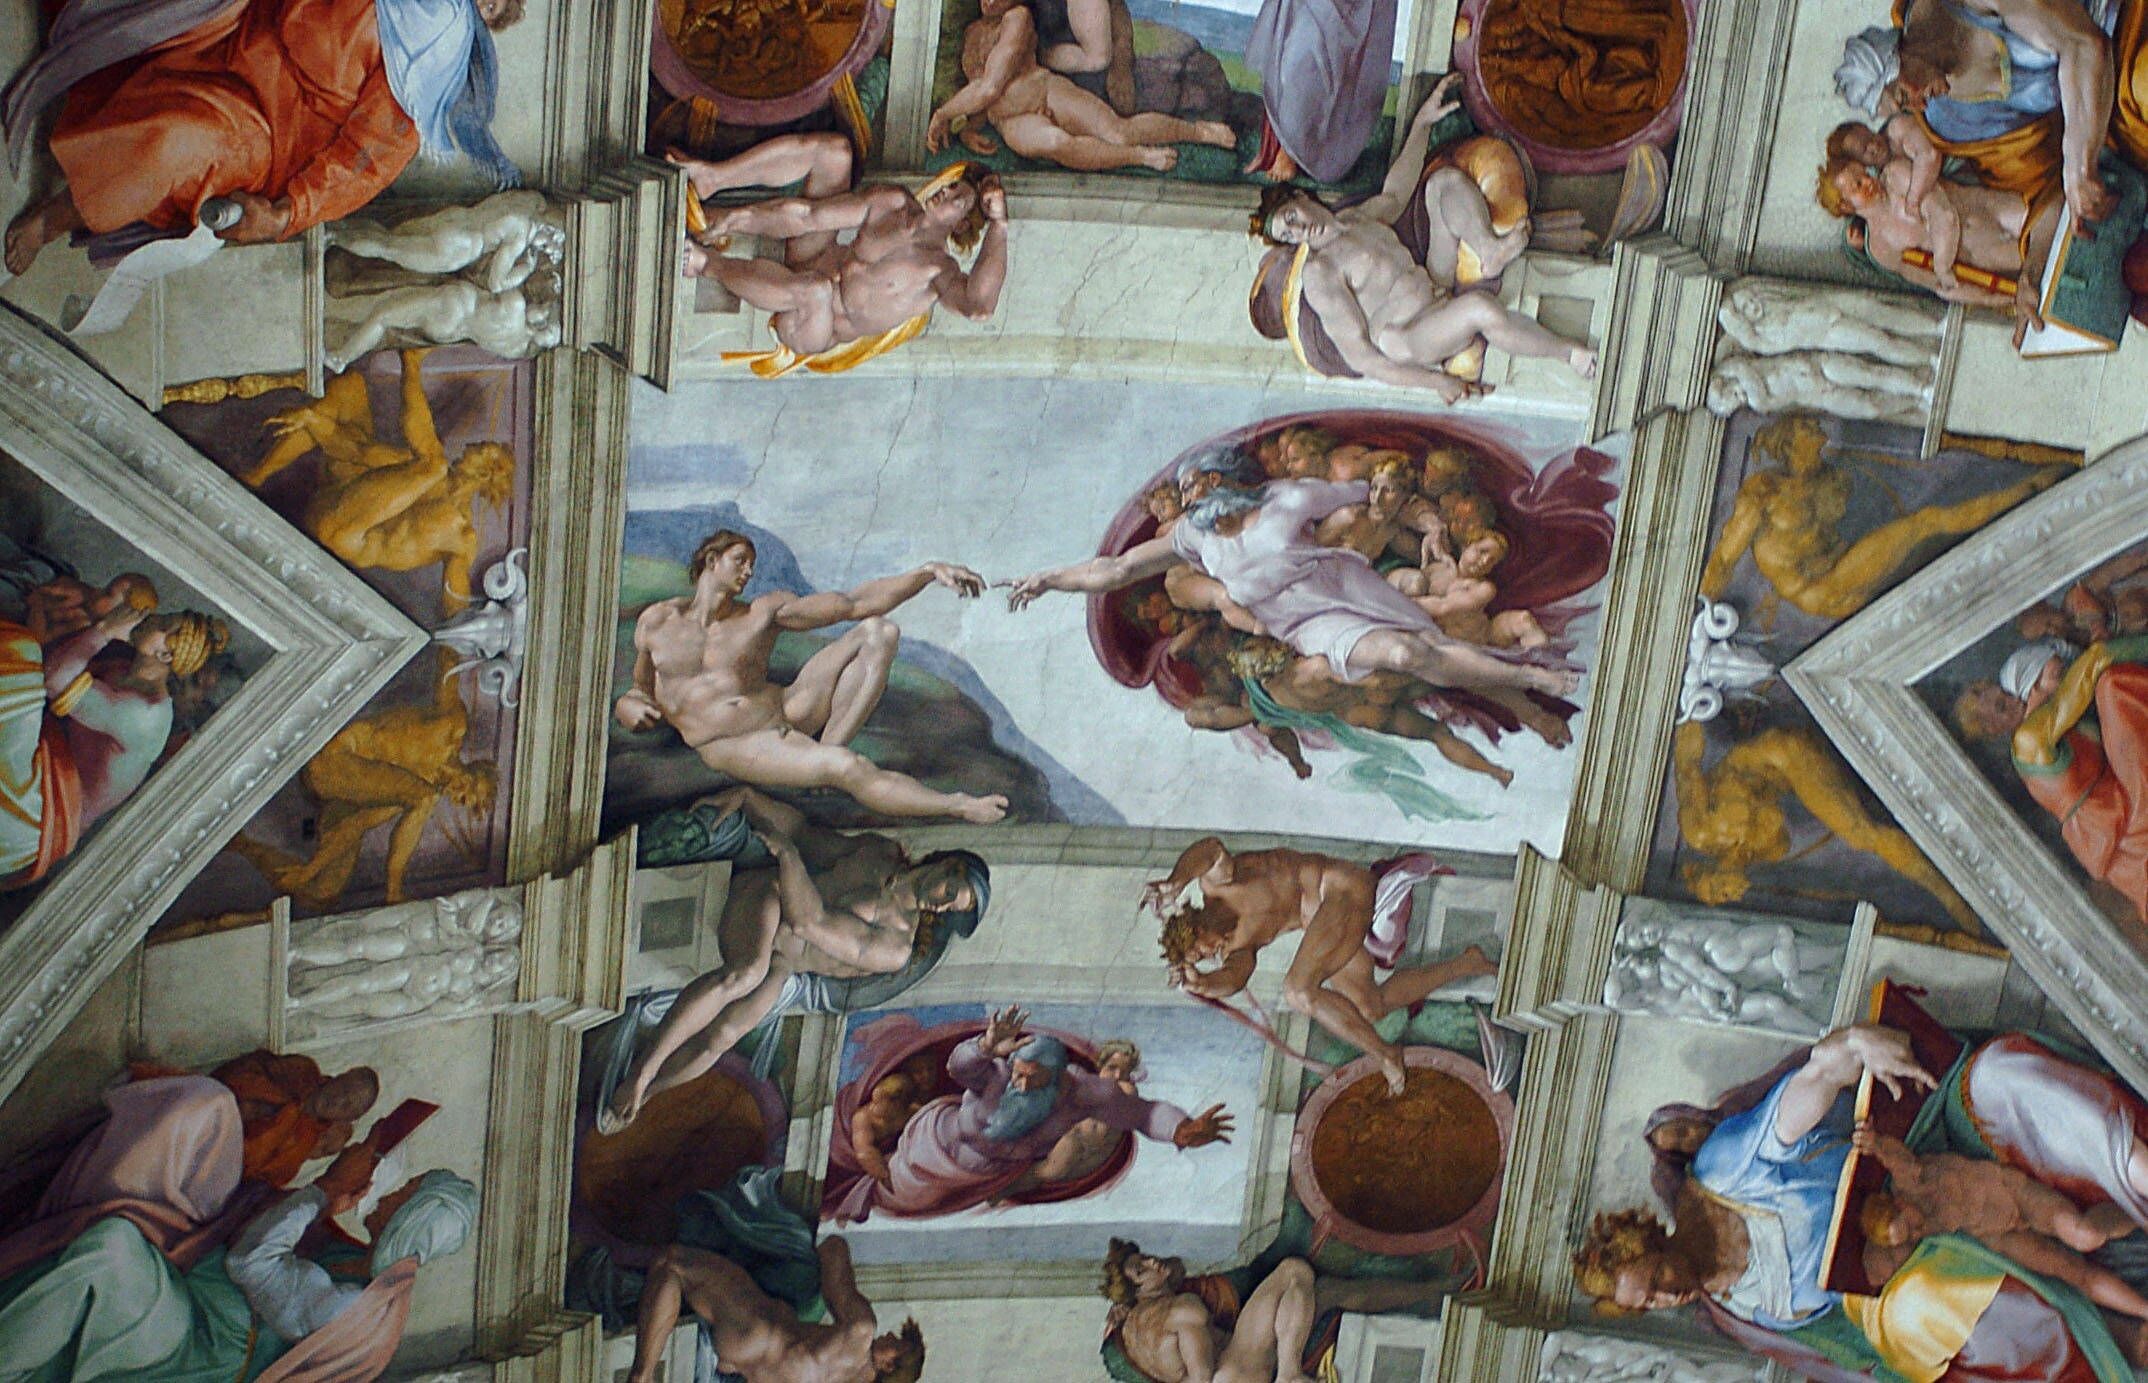 The greatest works of michelangelo at the sistine chapel Term paper Help